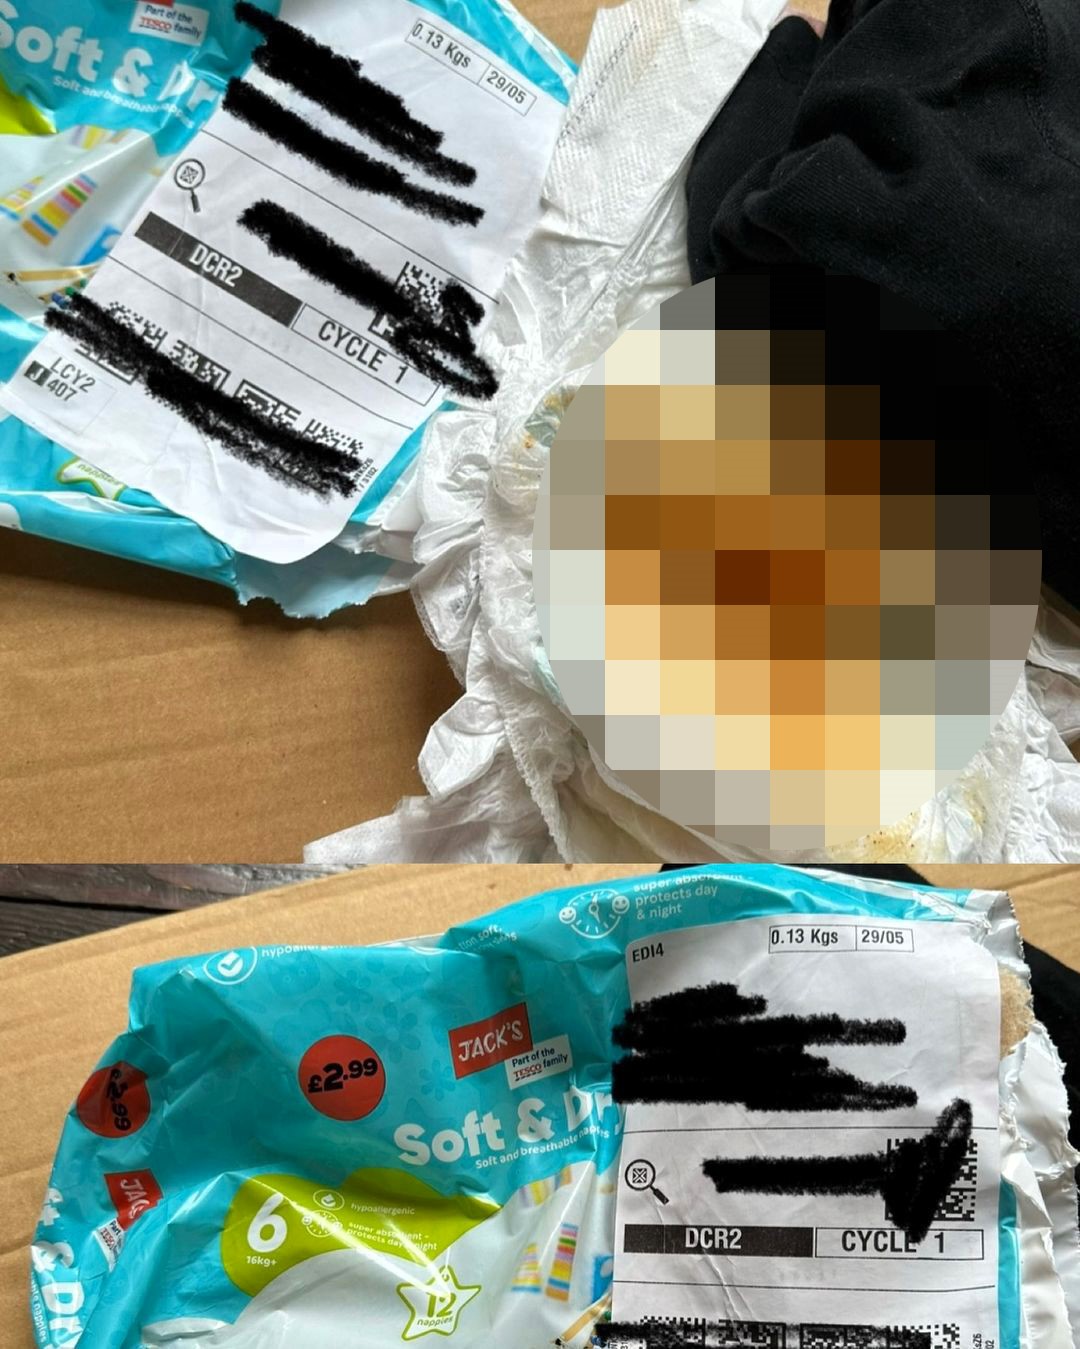 A Vinted customer was horrified to receive a £3 top in a "poo-filled nappy." The shocking incident went viral, sparking outrage and disbelief among social media users.